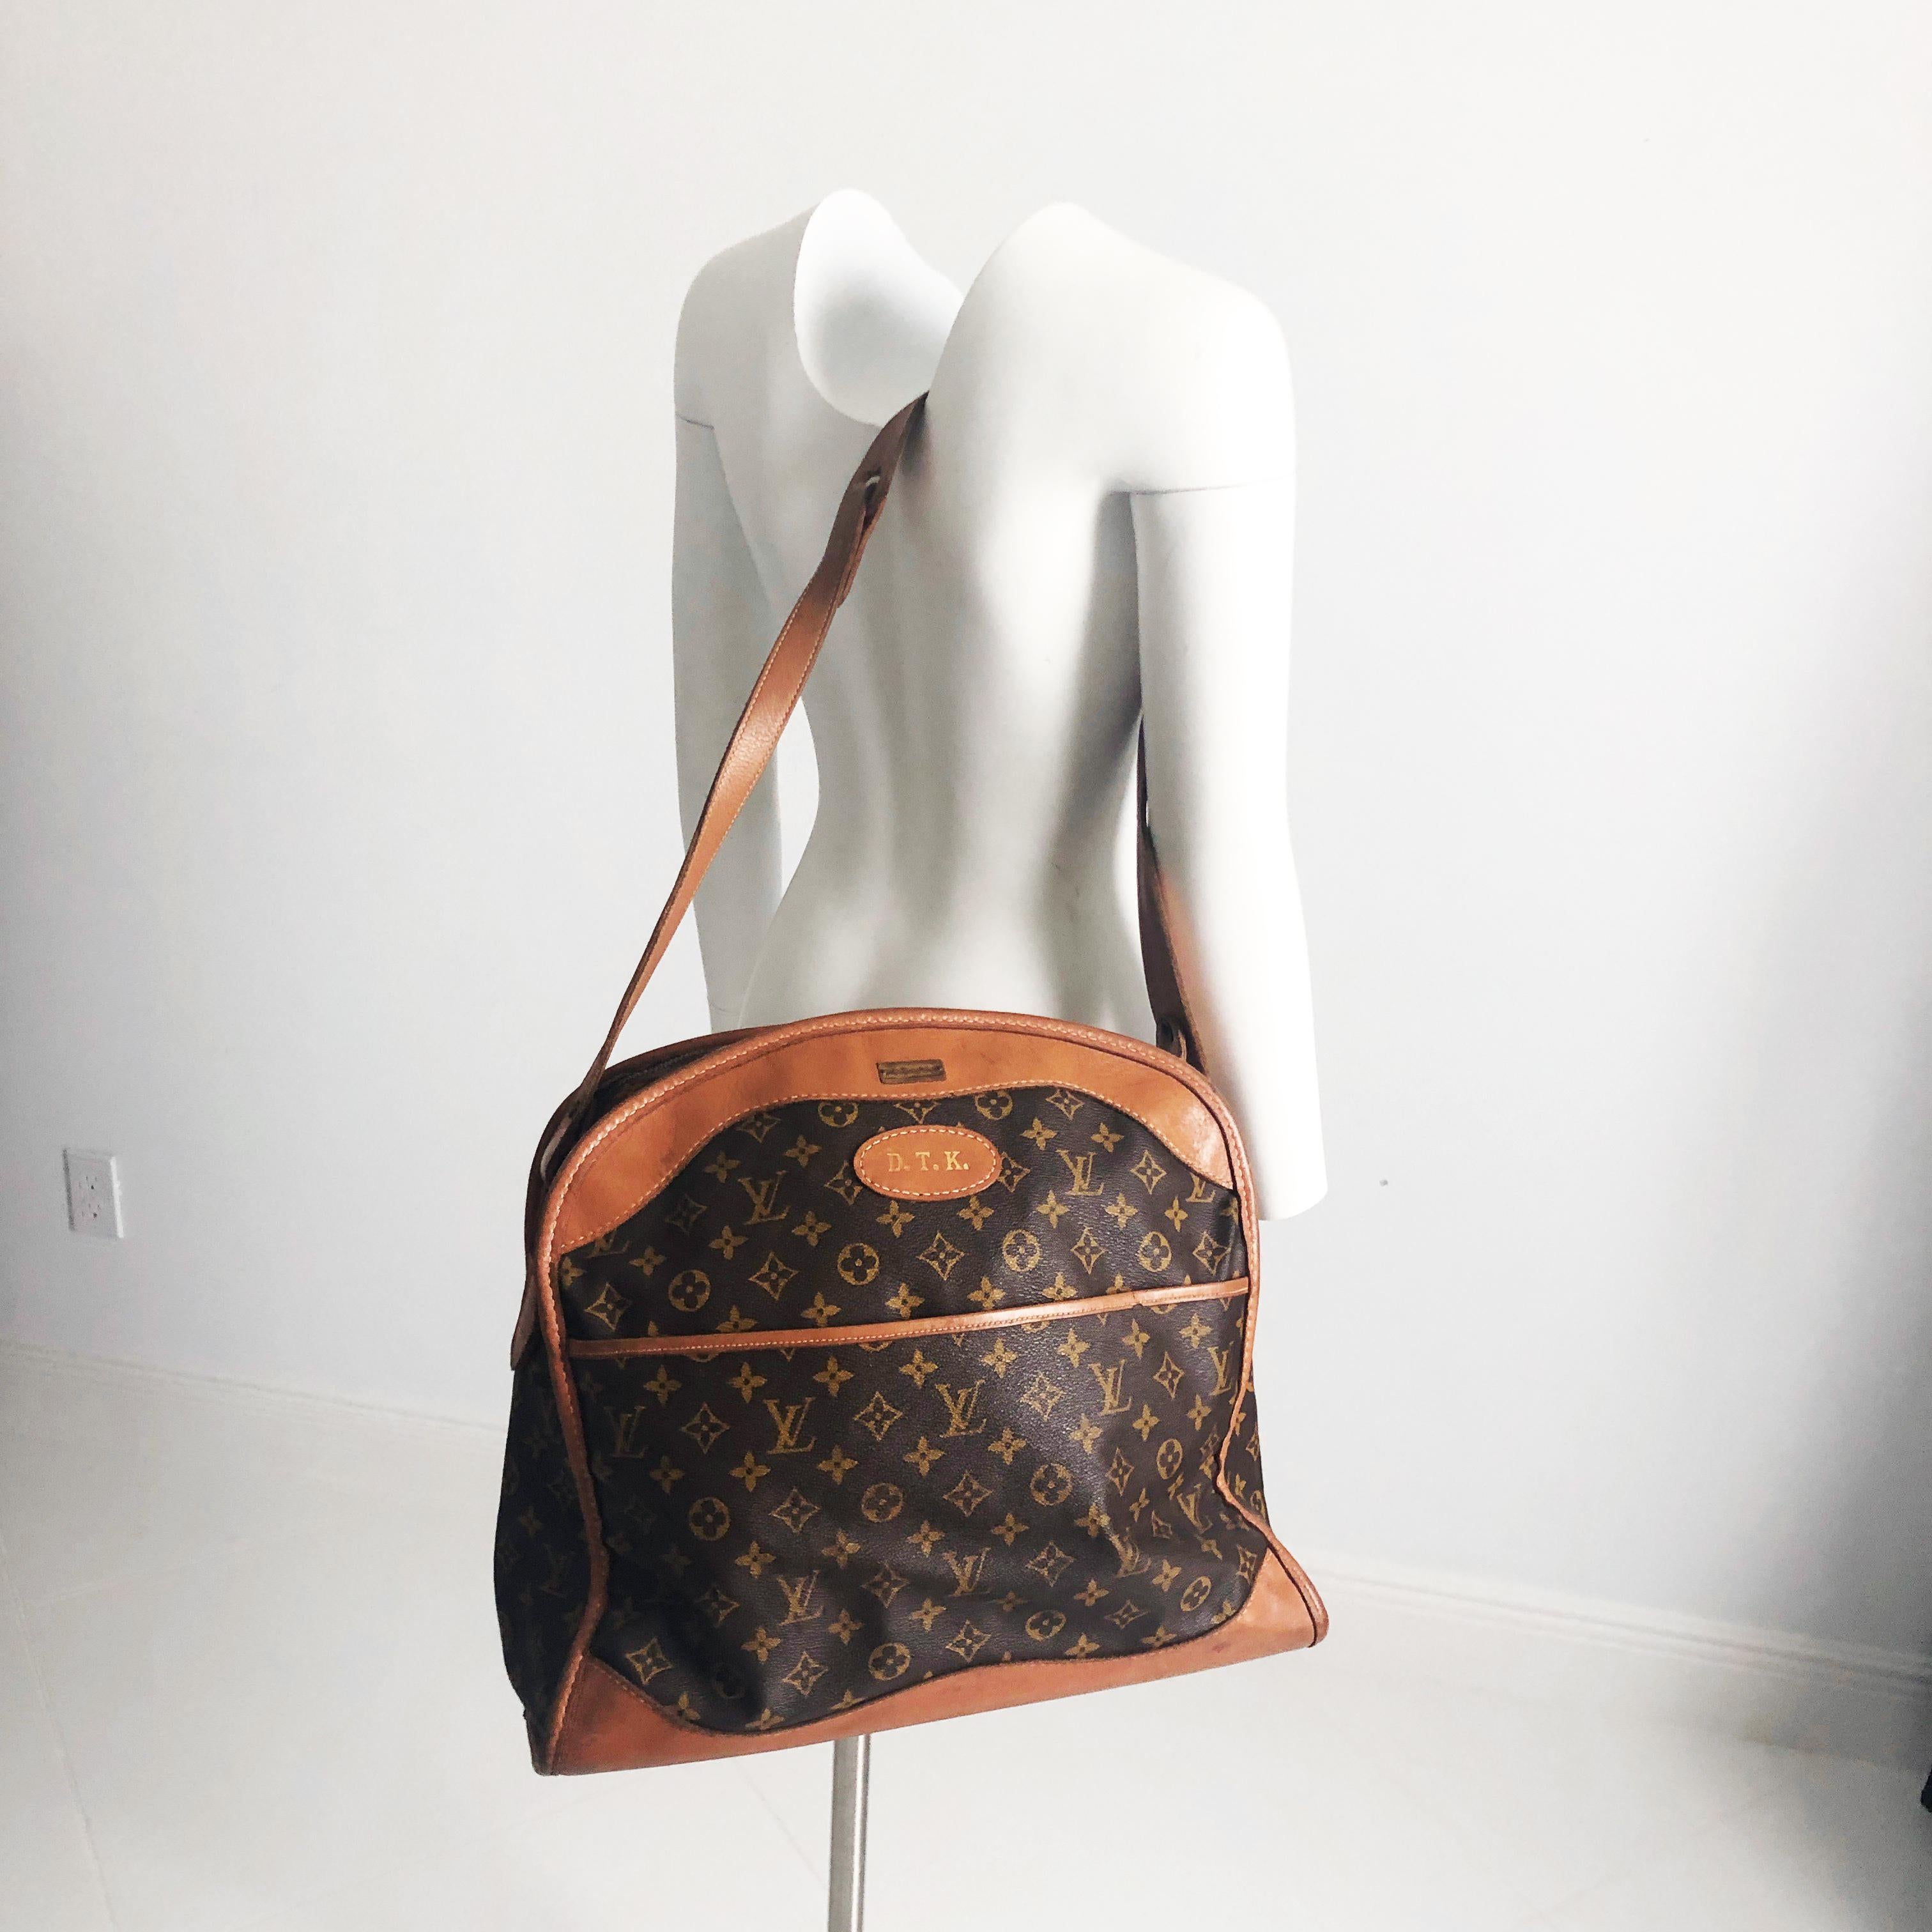 Brown Louis Vuitton Carry On Bag Luggage Tote Monogram Canvas French Co. Saks 70s